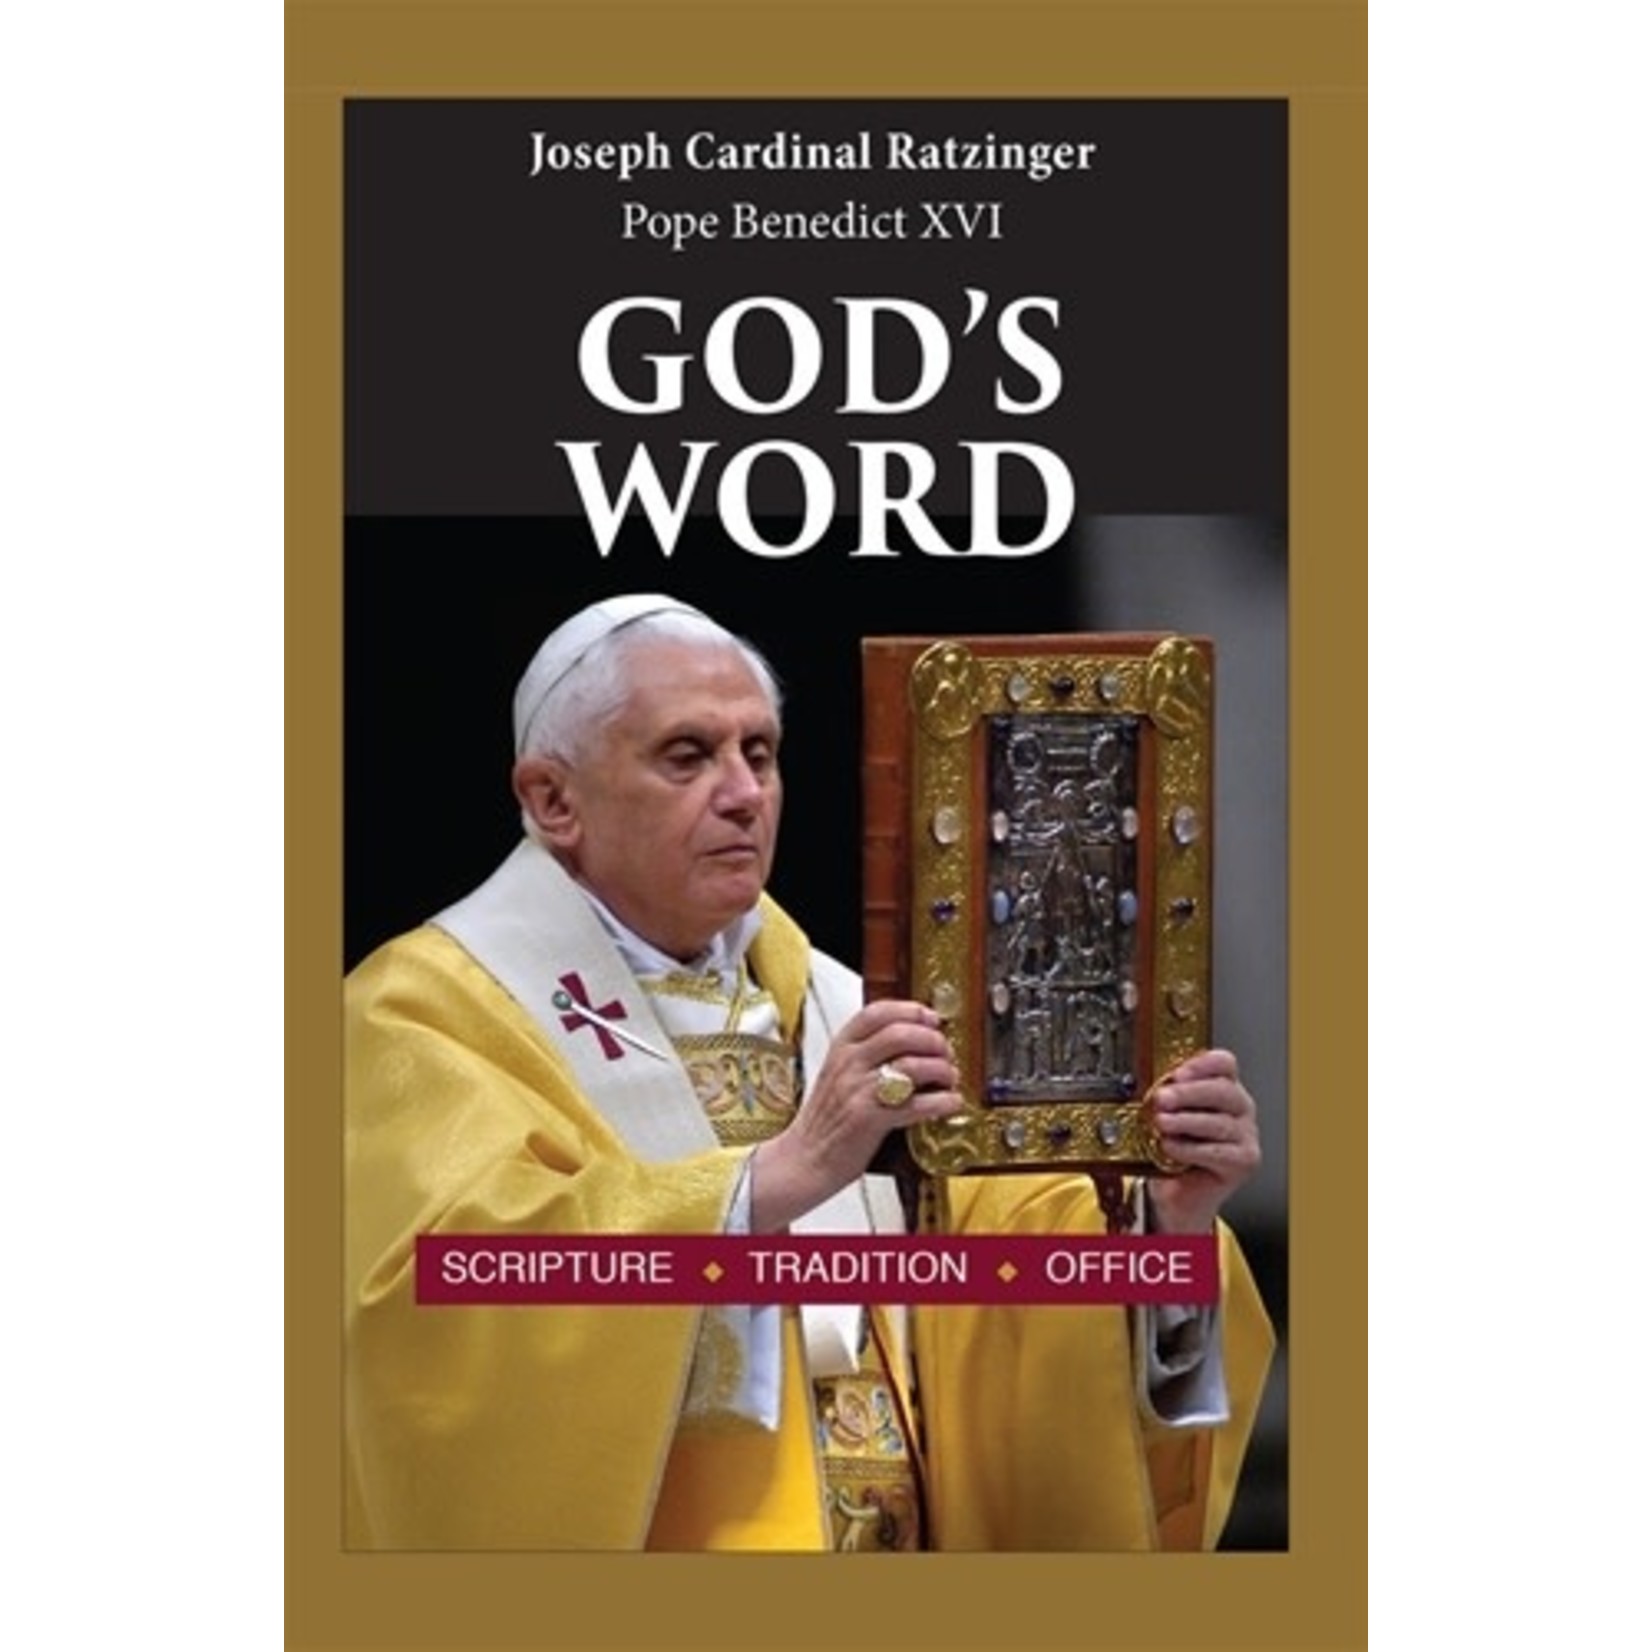 God's Word- Scripture, Tradition, Office